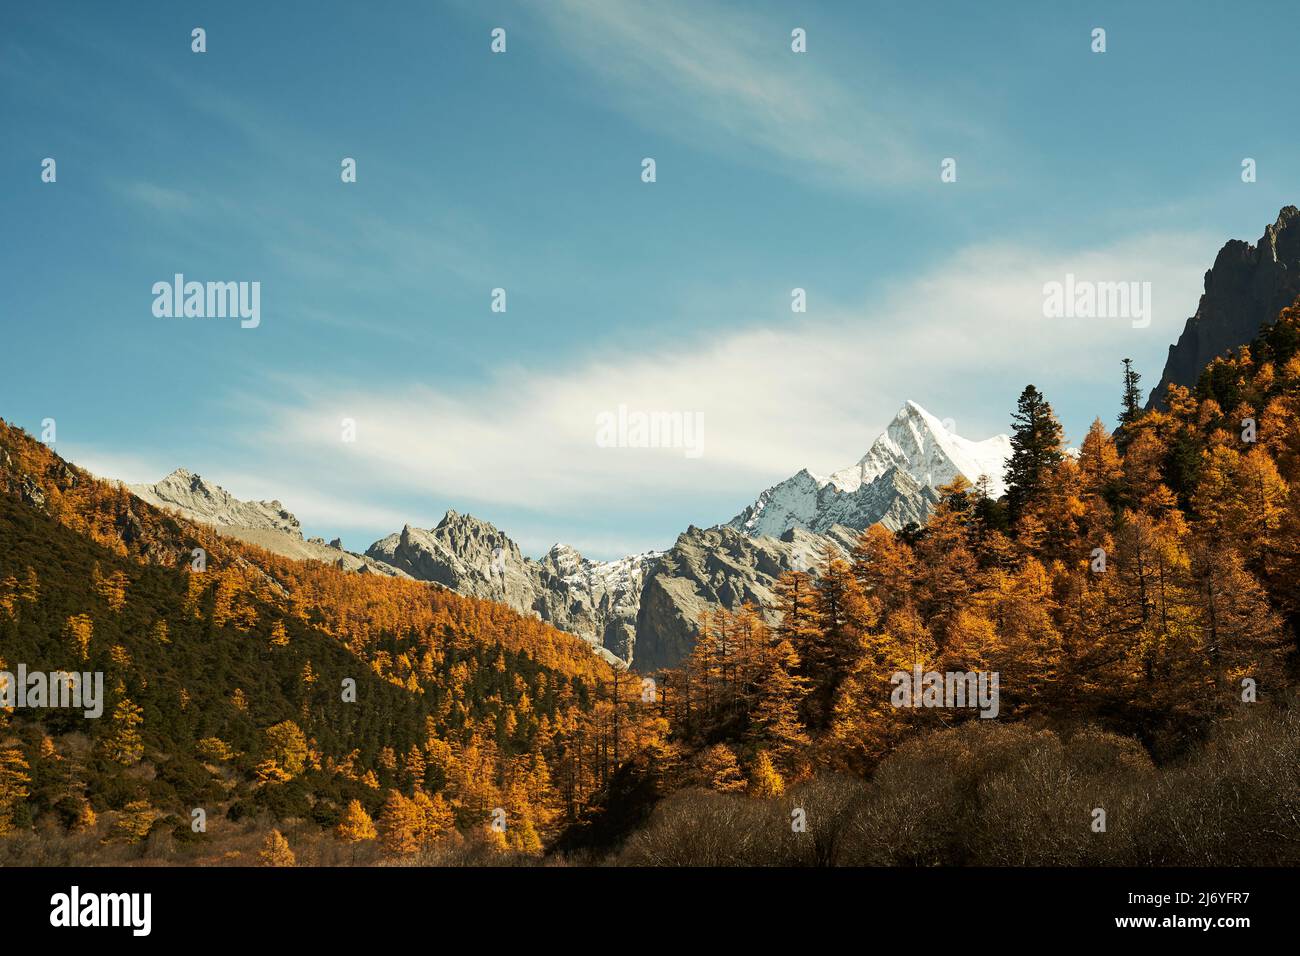 mountain range and autumn foliage in yading national park, daocheng county, sichuan province, china Stock Photo